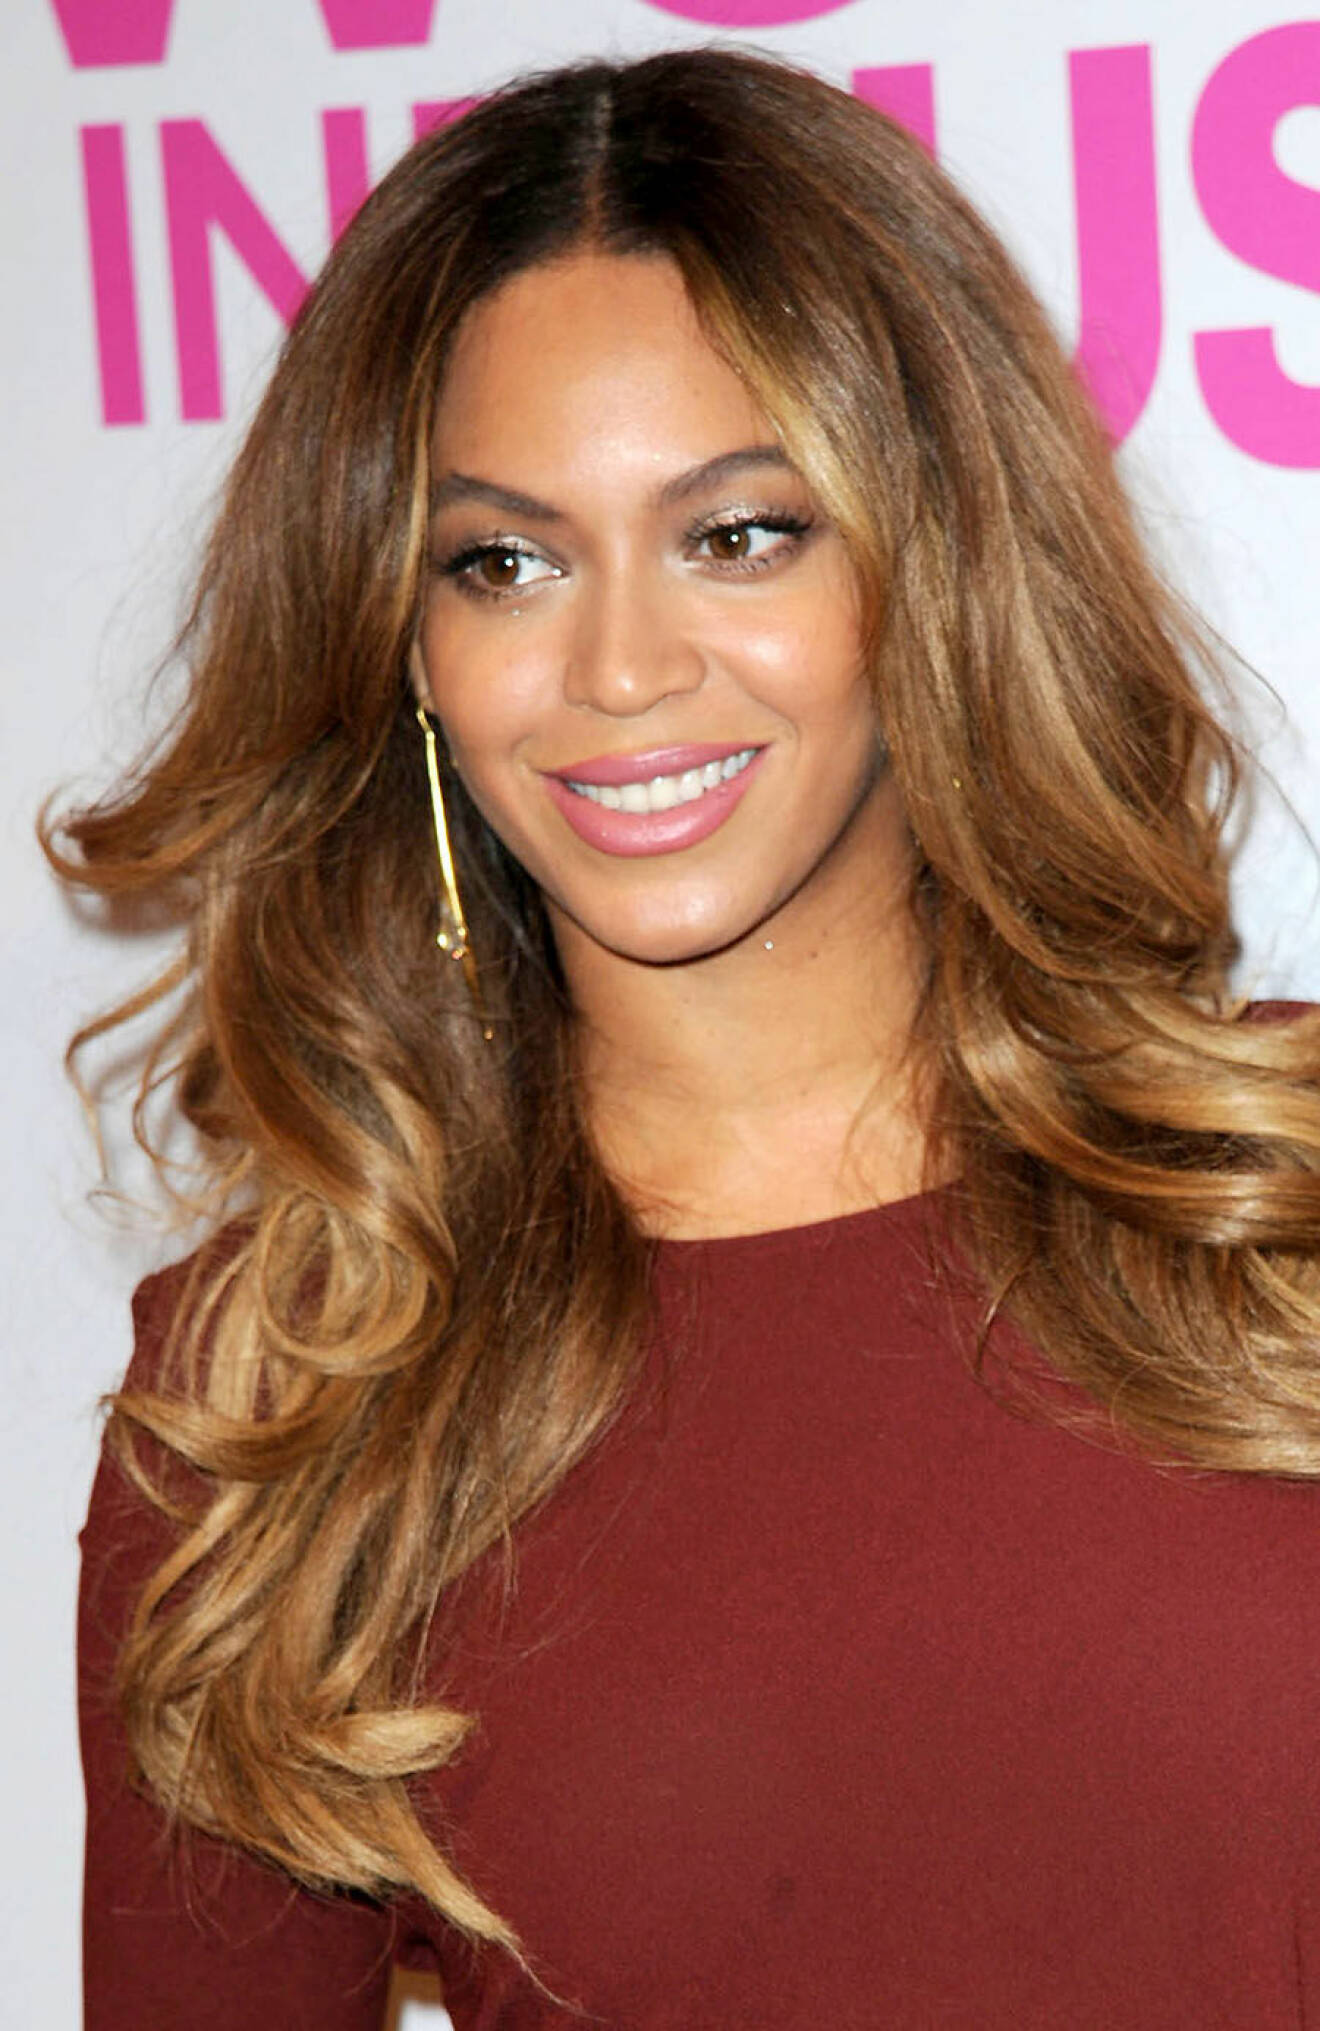 Beyonce at arrivals for Billboard Women in Music Awards, Cipriani Wall Street, New York, NY December 12, 2014. Photo By: Kristin Callahan/Everett Collection